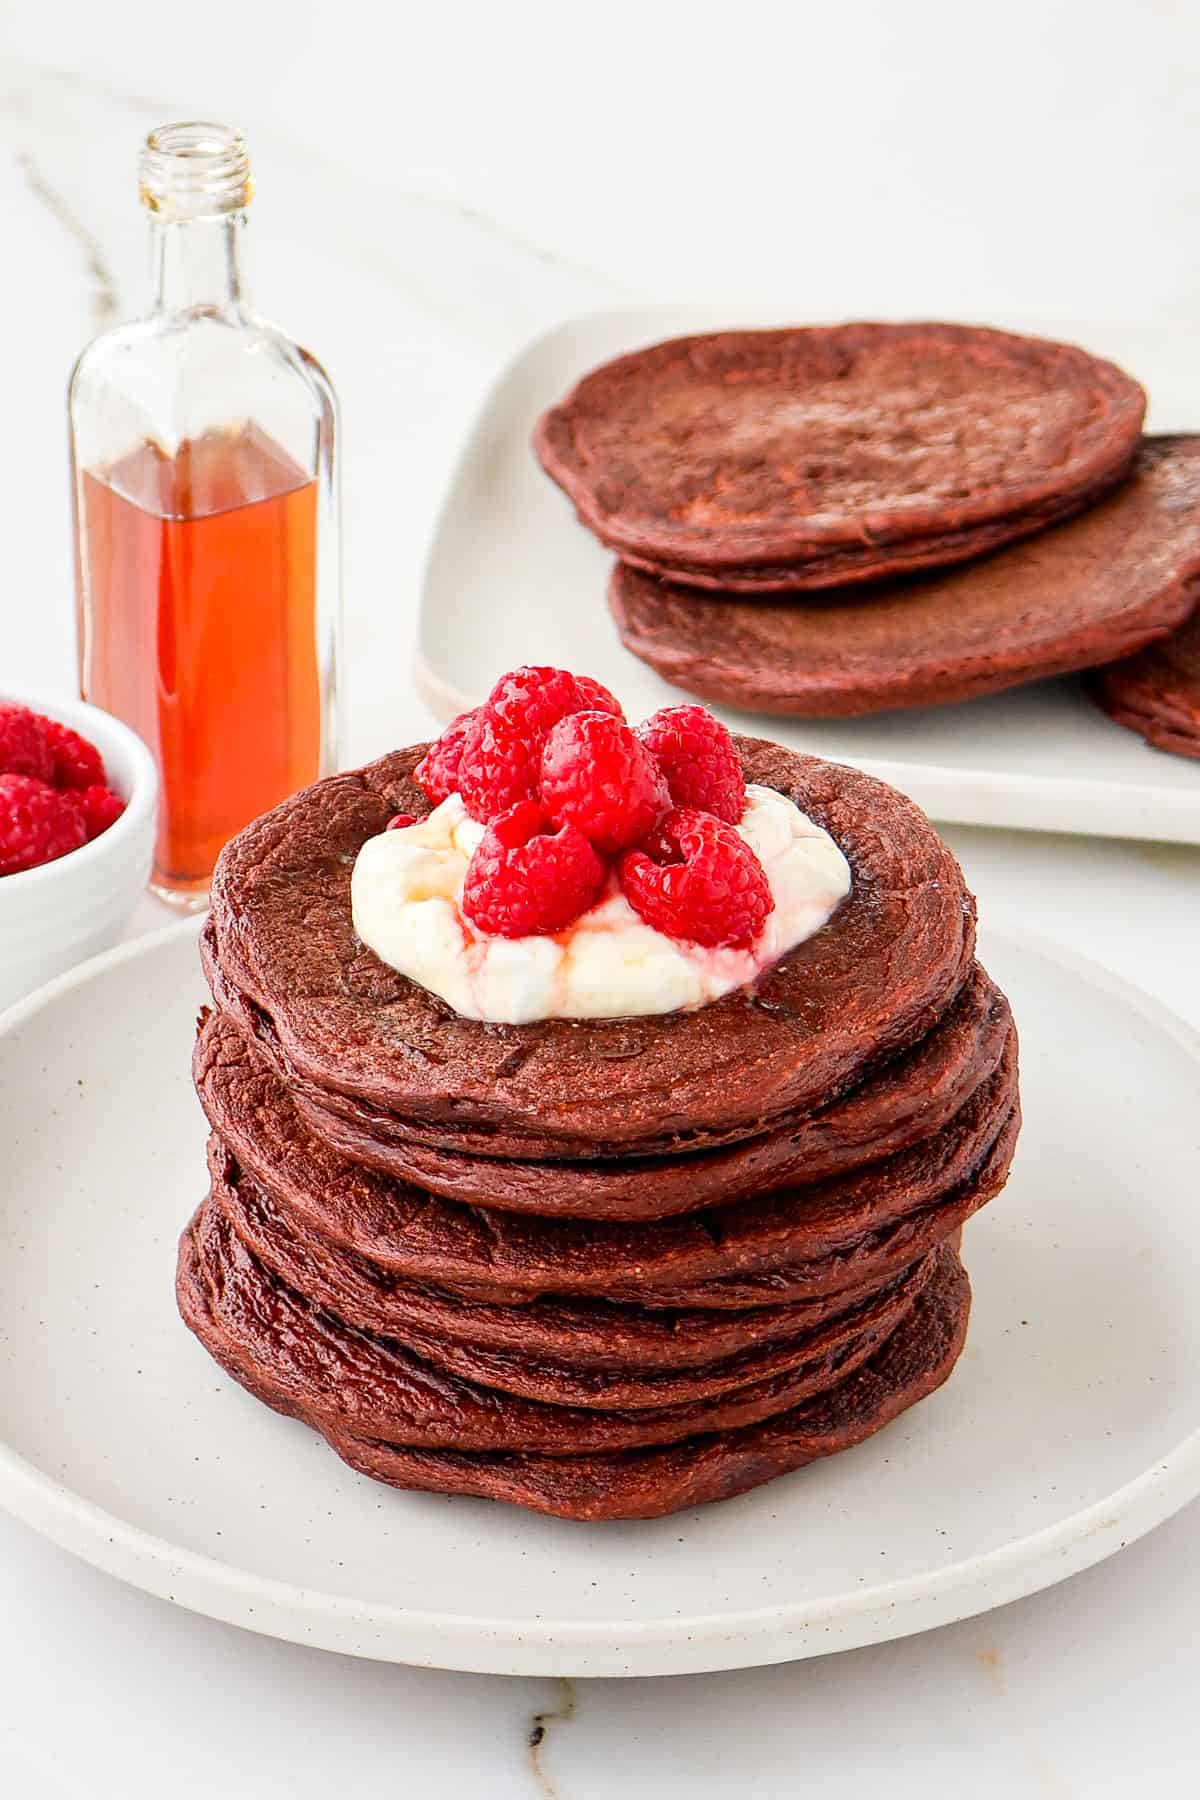 Side shot of chocolate protein pancakes with yoghurt and raspberries on top.